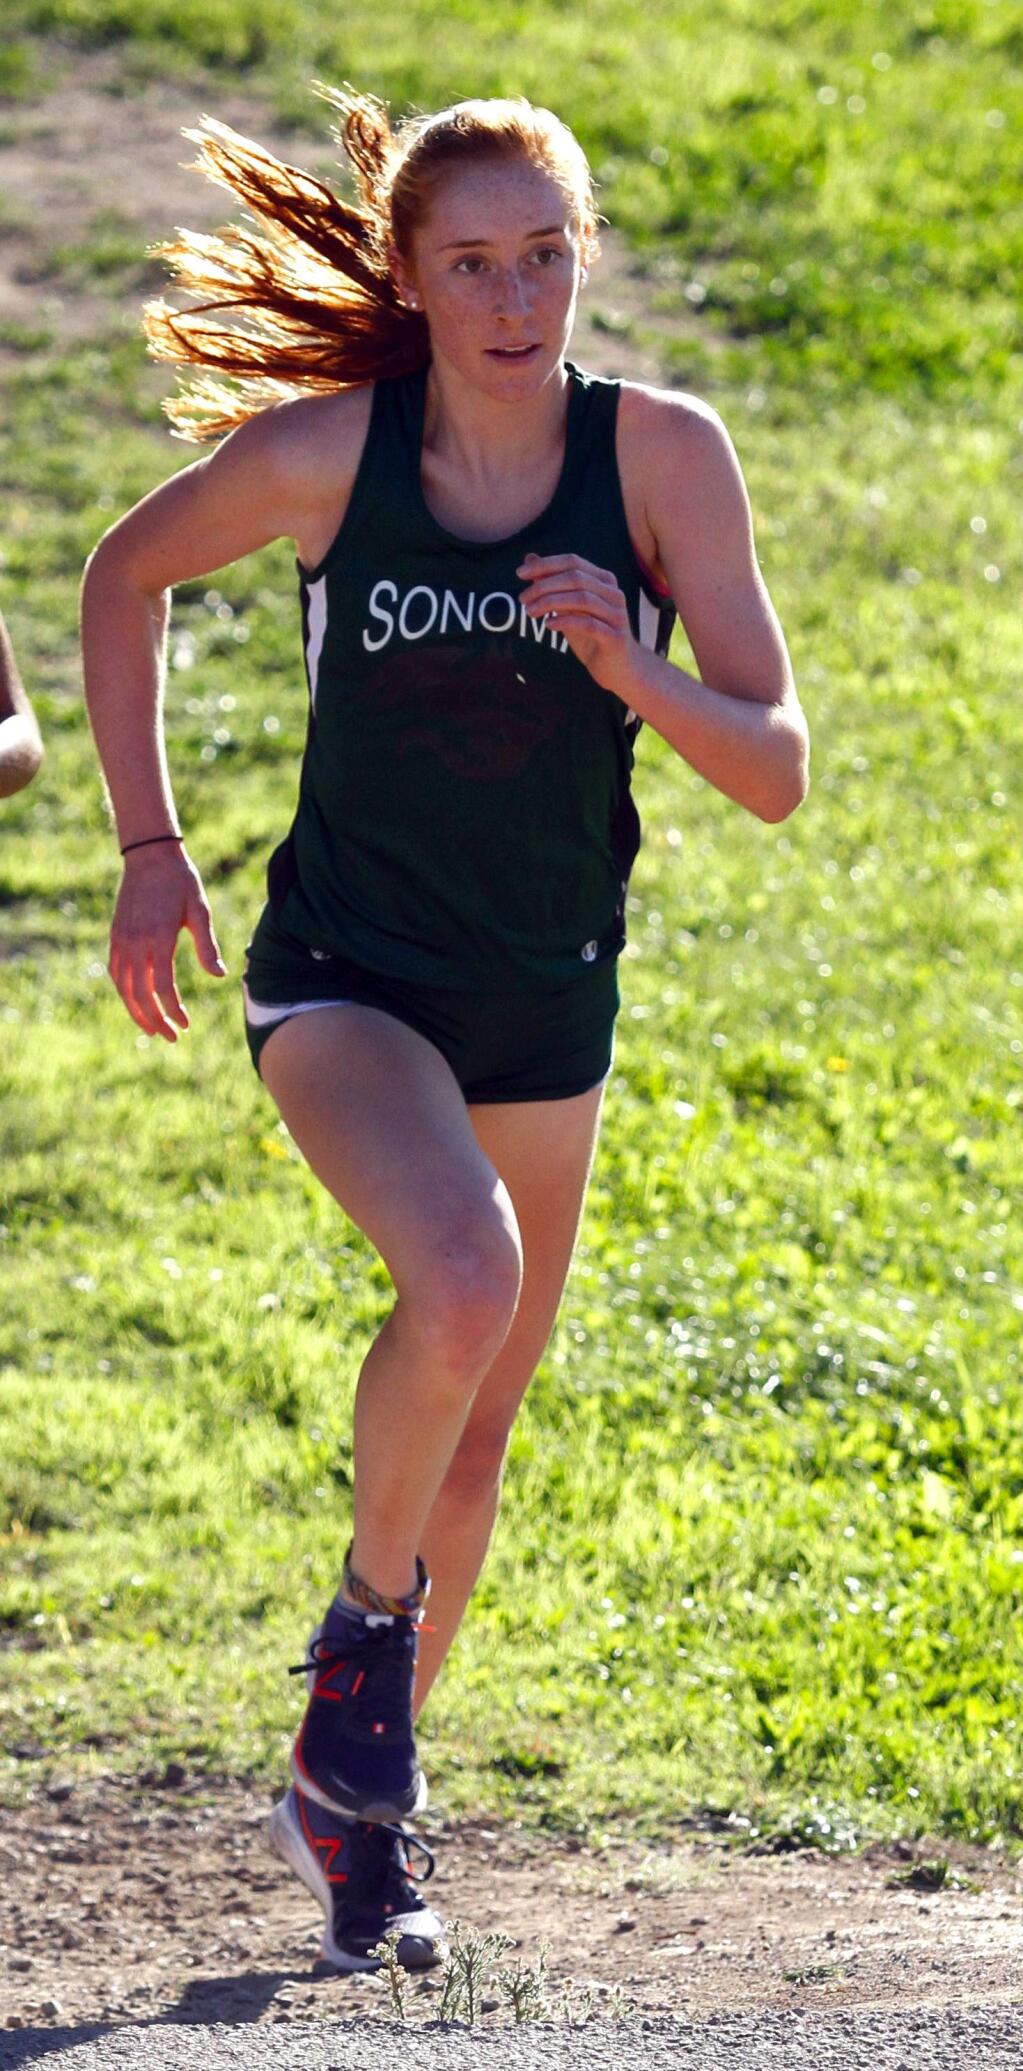 Bill Hoban/Index-TribuneAmy Stanfield finished ninth in the North Coast Section Division-3 cross country meet Saturday and qualified for the state meet next Saturday in Fresno.